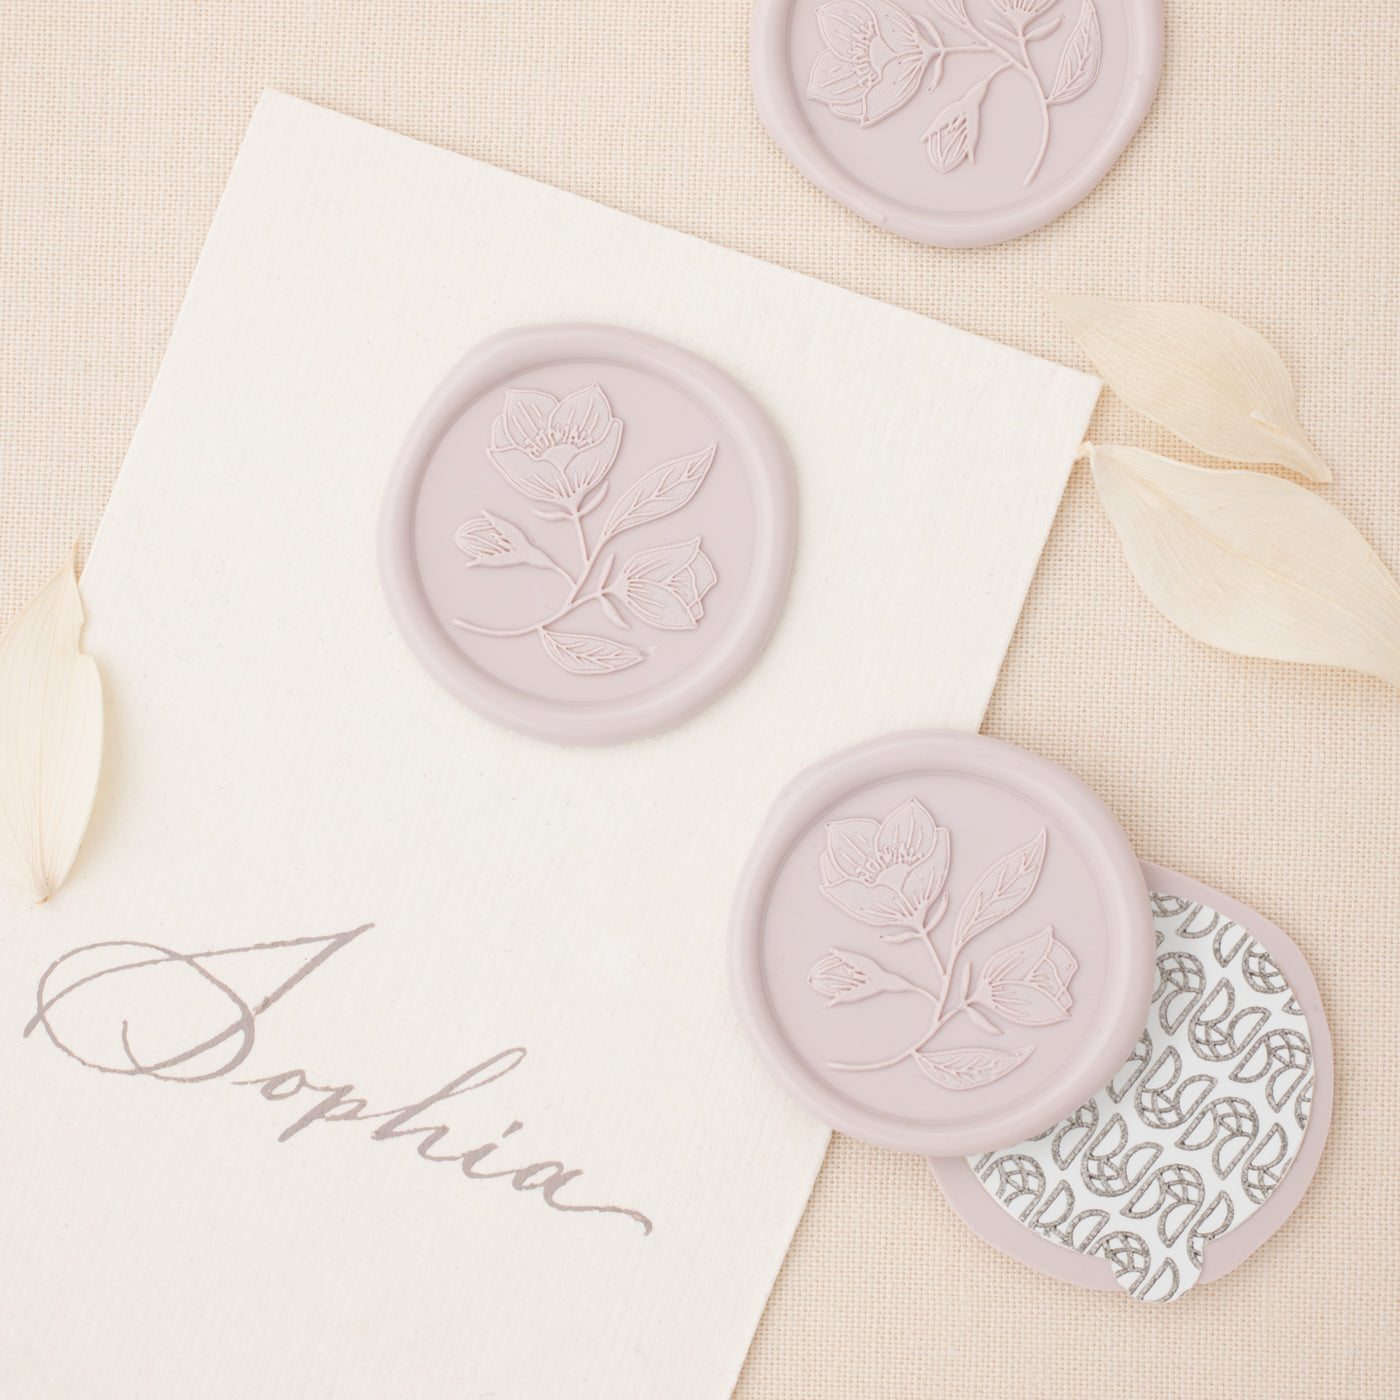 A Bunch Of Roses，wax Seal Stamp，wax Decorative Seal, Envelope